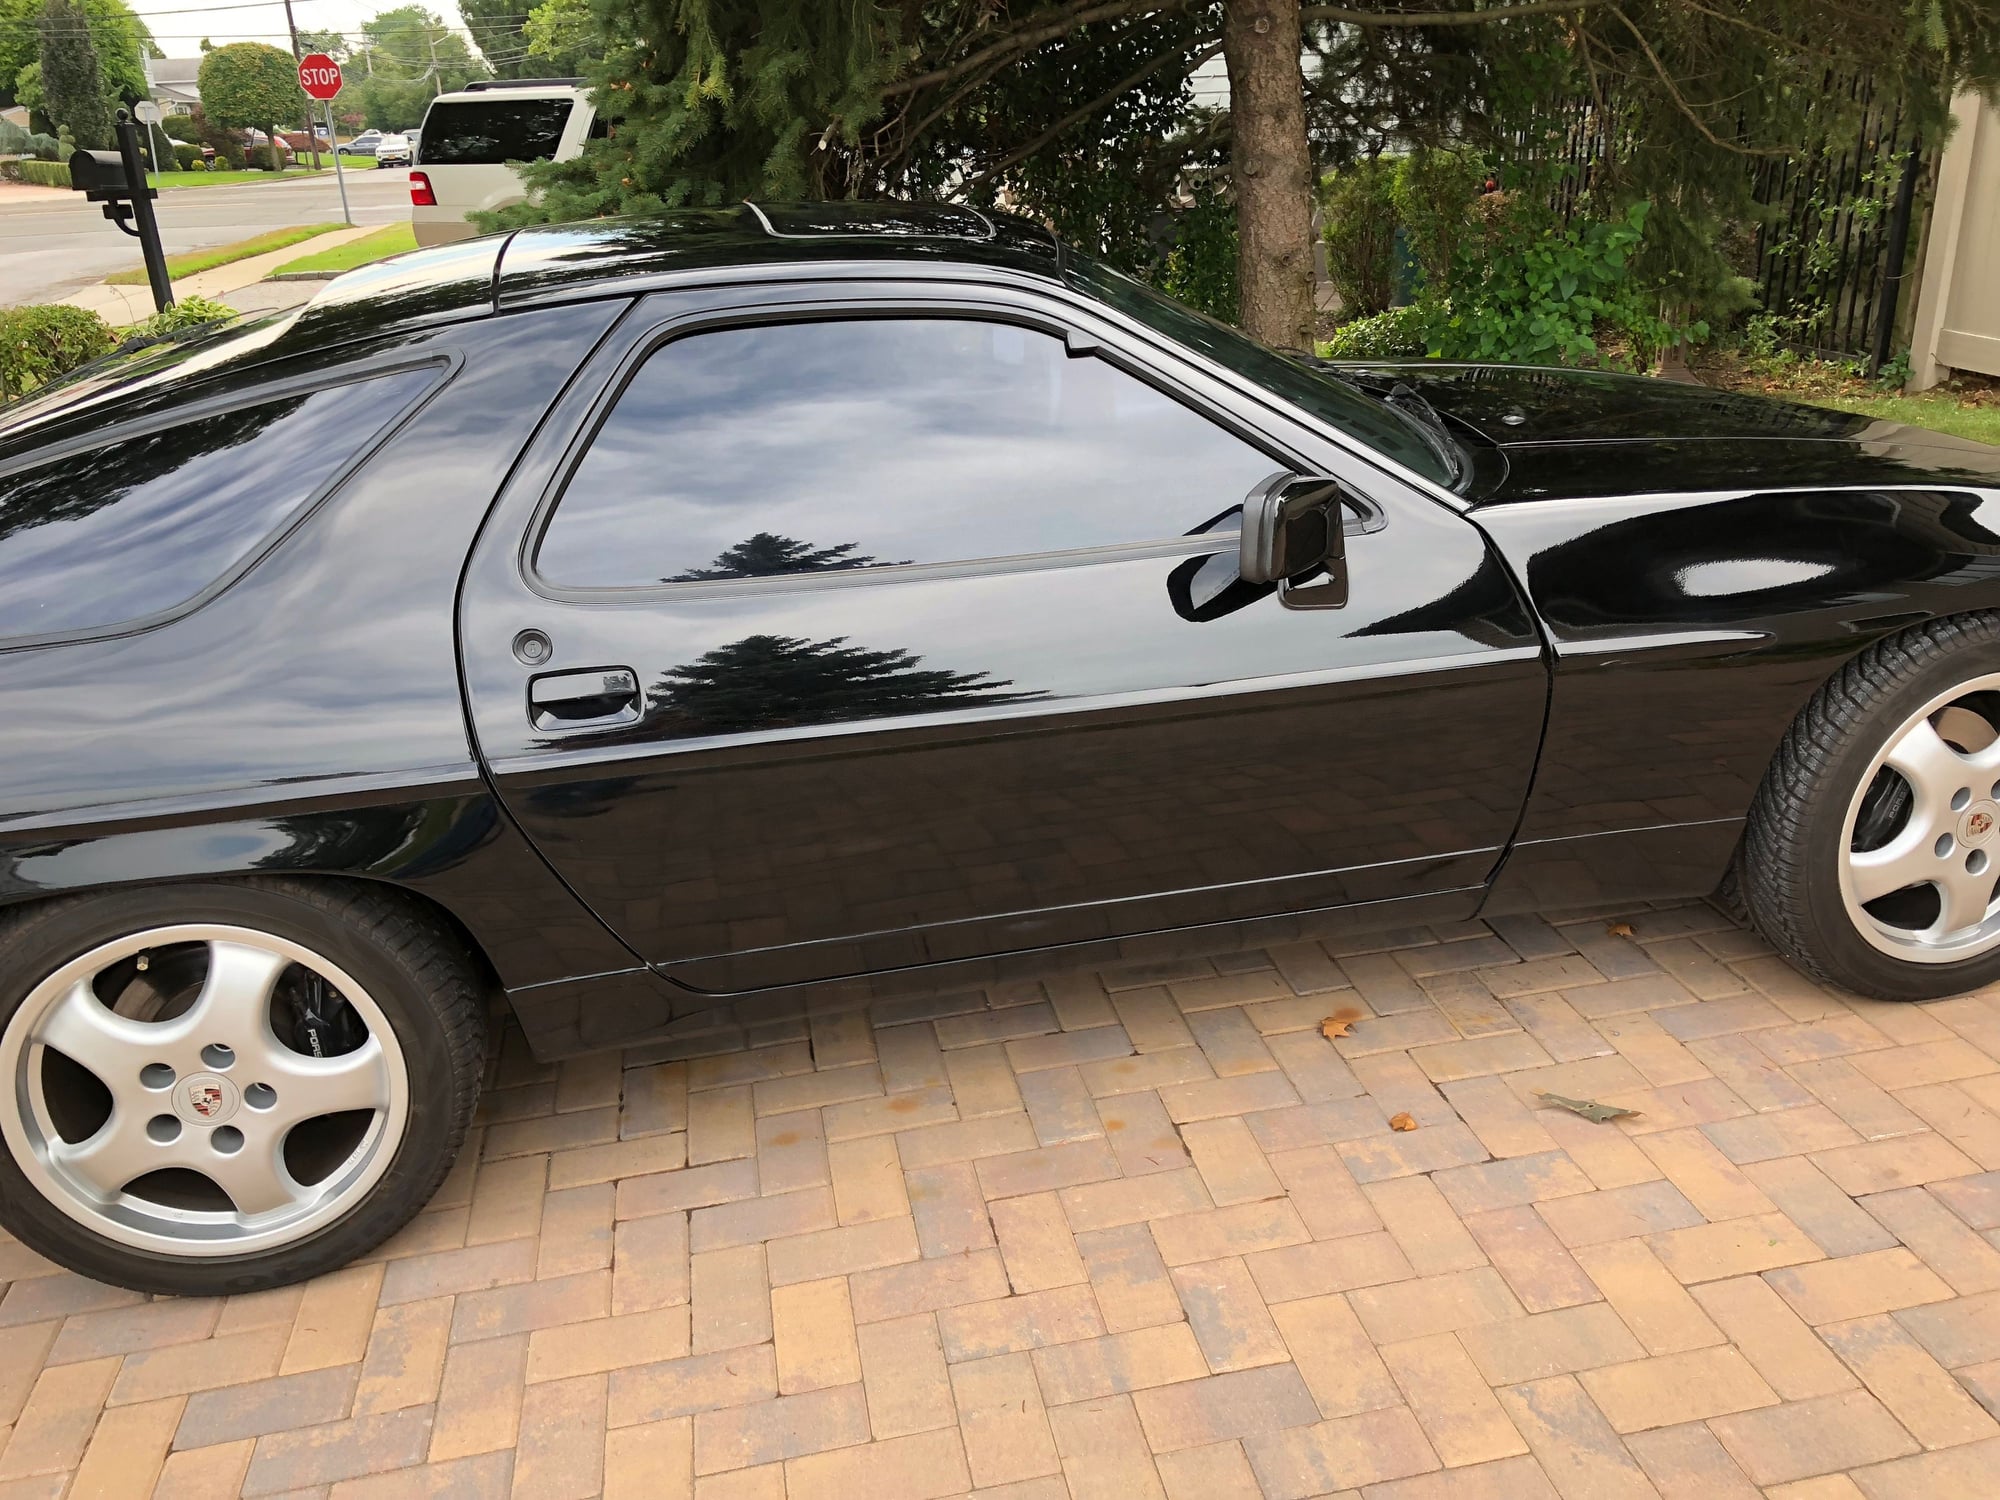 1987 Porsche 928 - 1987 S4 (Black on black with a 5 speed) - Used - VIN WP0JB0920HS862105 - 82,431 Miles - 8 cyl - 2WD - Manual - Coupe - Black - Massapequa, NY 11758, United States